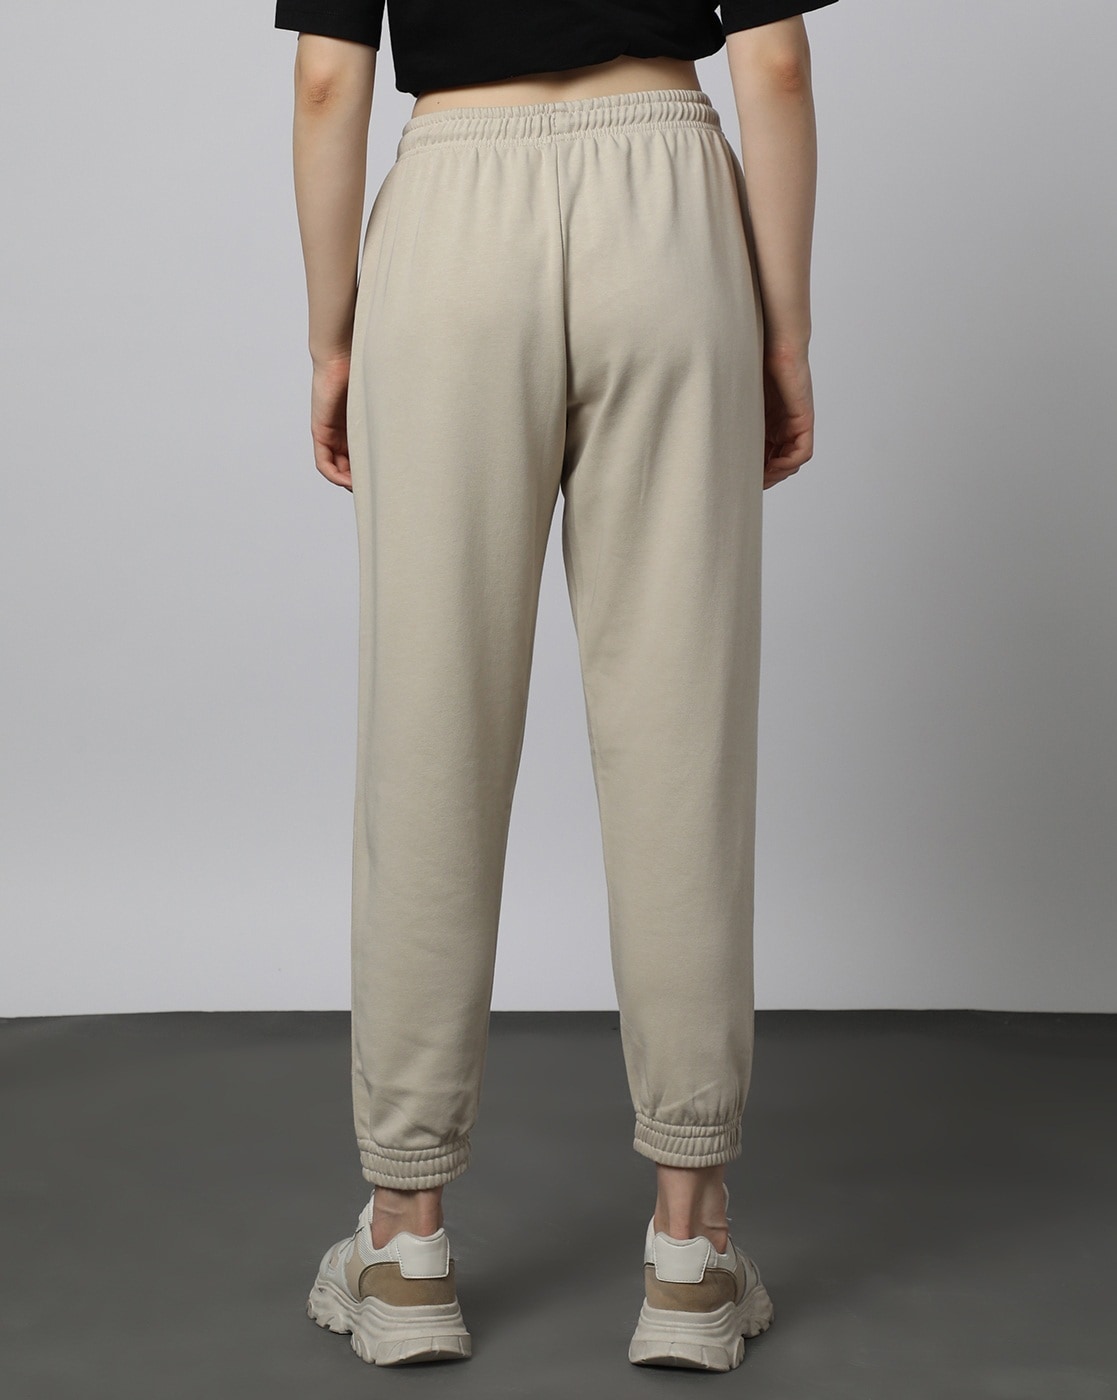 Buy Beige Track Pants for Women by Outryt Sport Online